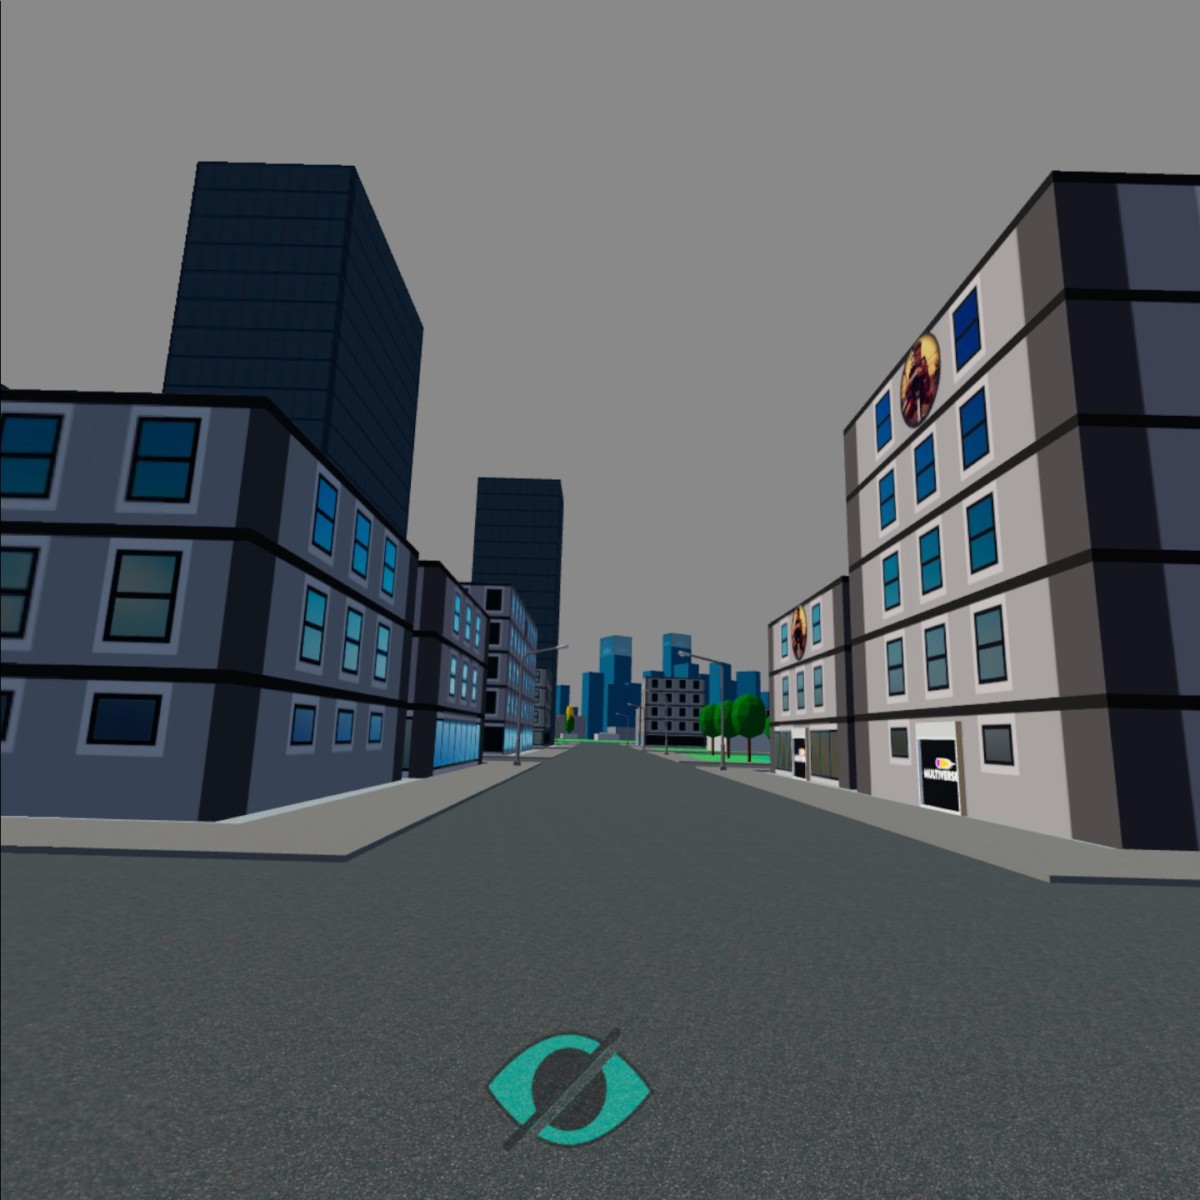 com.oculus.vrshell 20220112 175703 - How to Buy Virtual Land in the Multiverse For Free